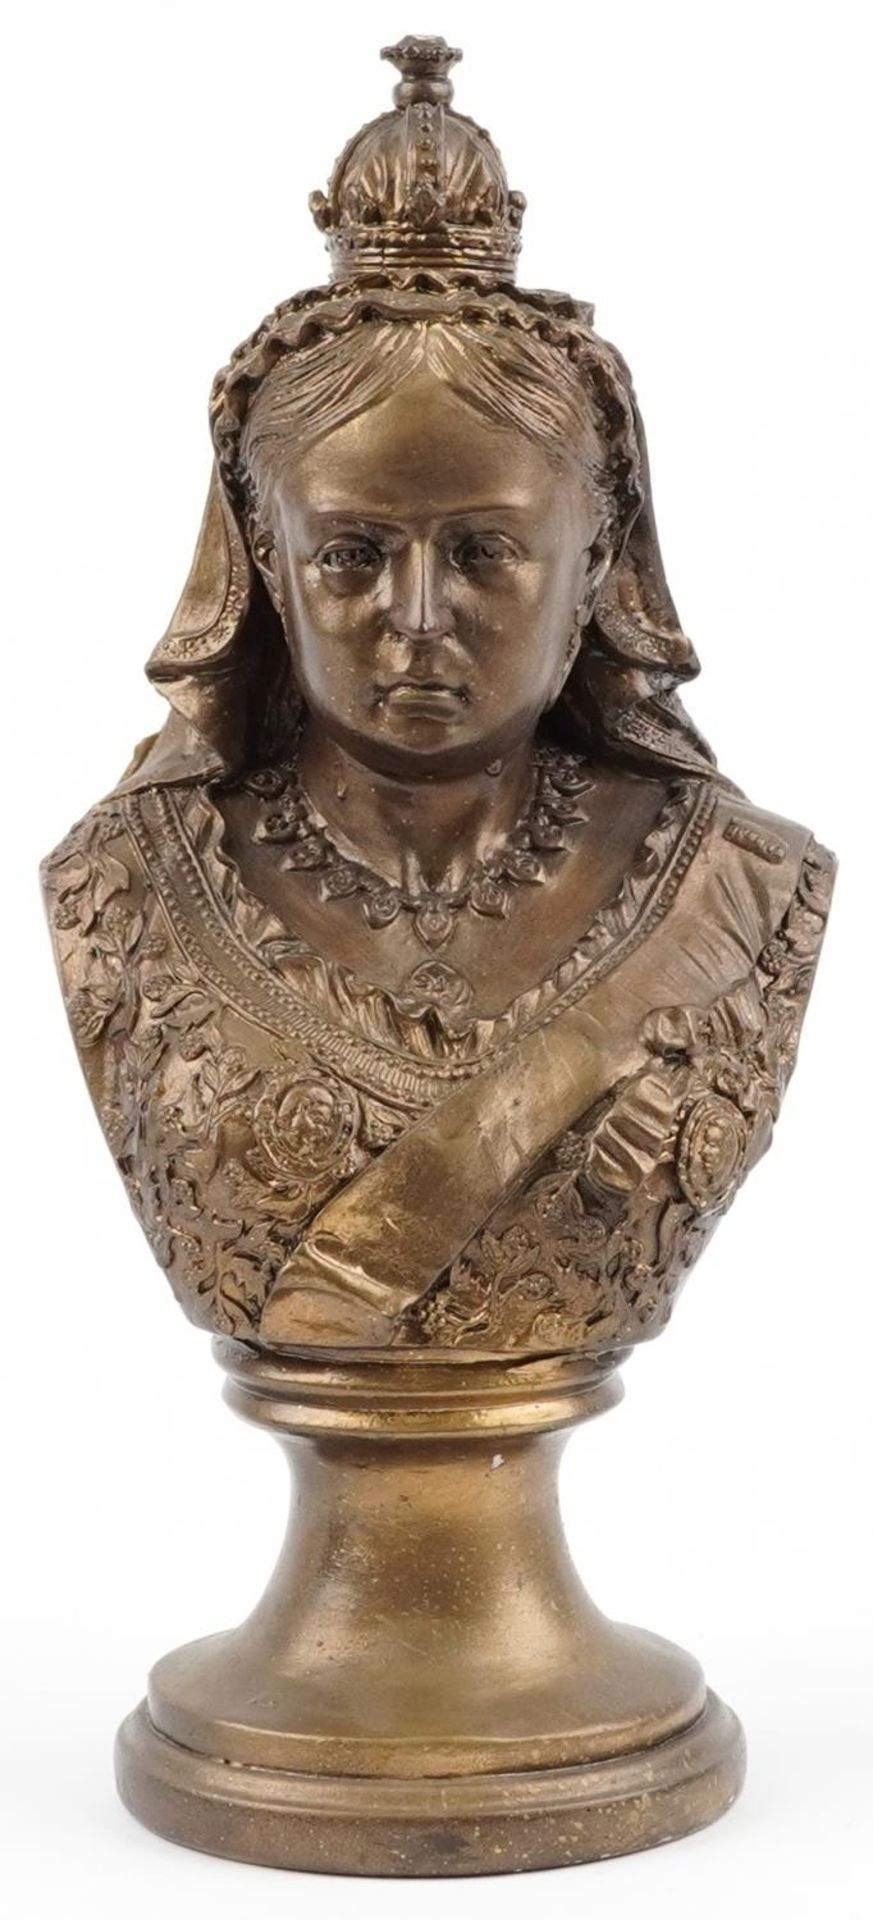 19th century style classical bronzed bust of Queen Victoria, 38.5cm high - Image 2 of 4